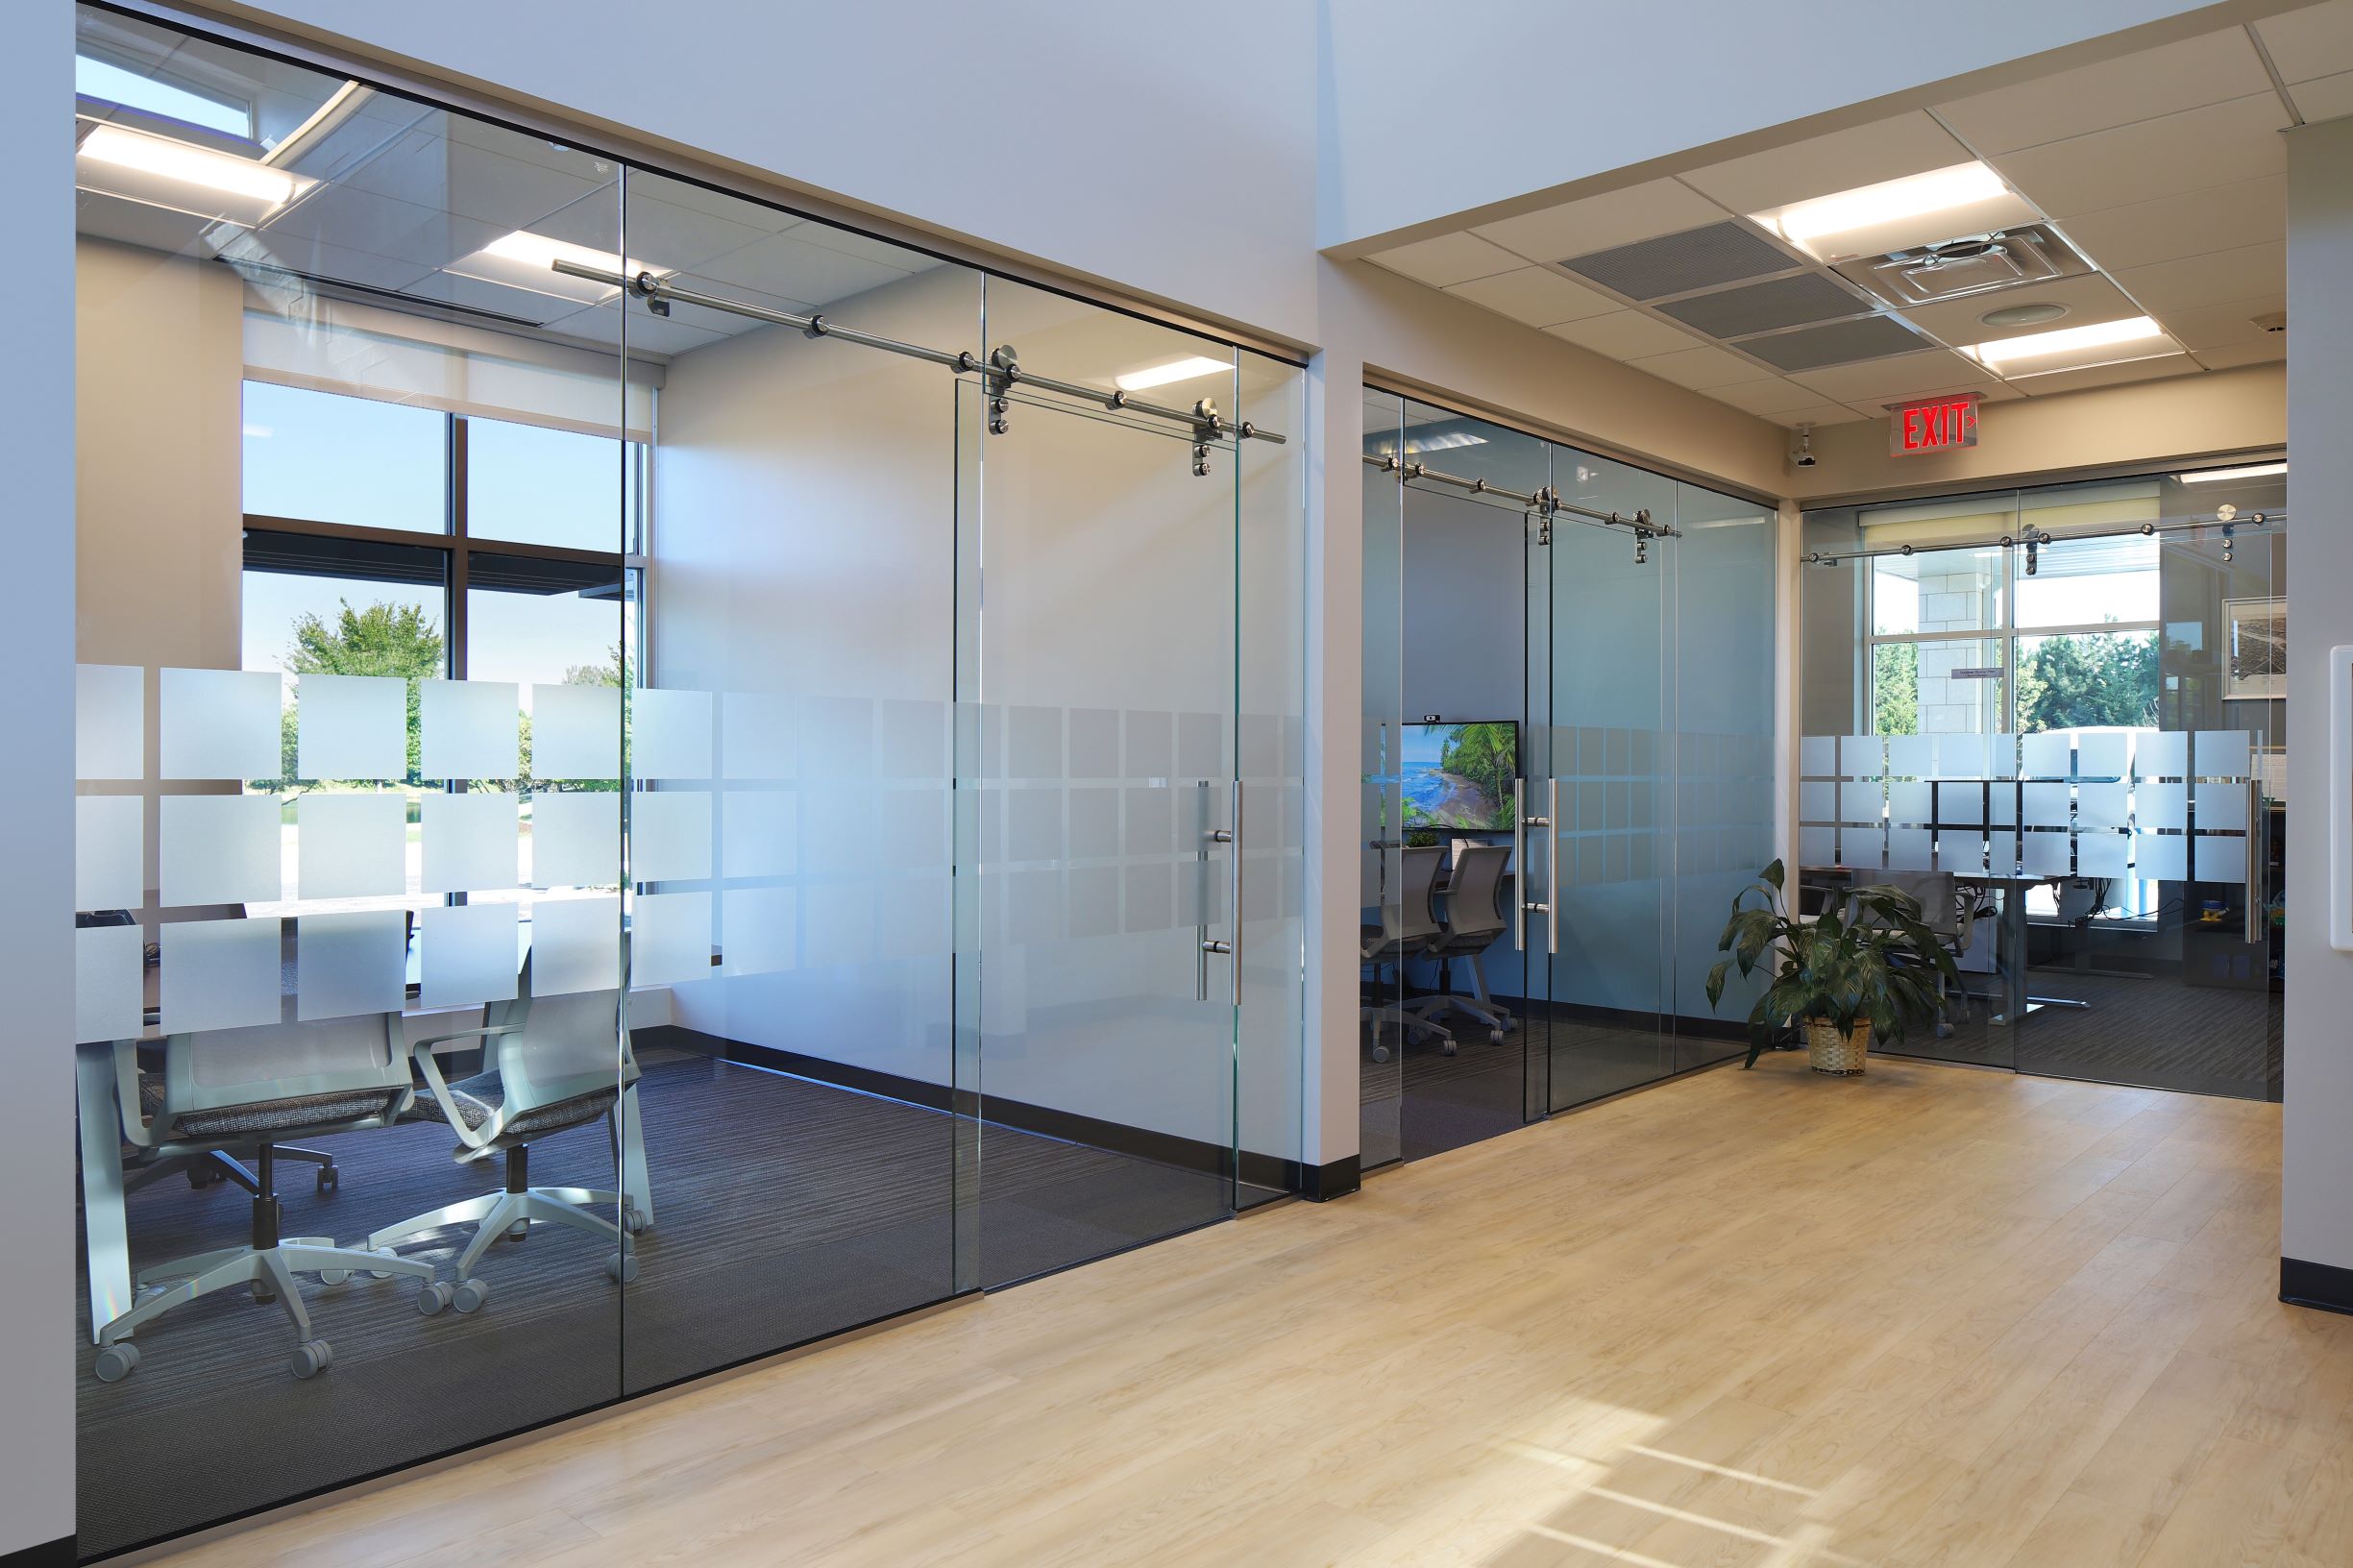 Private offices built to meet members needs